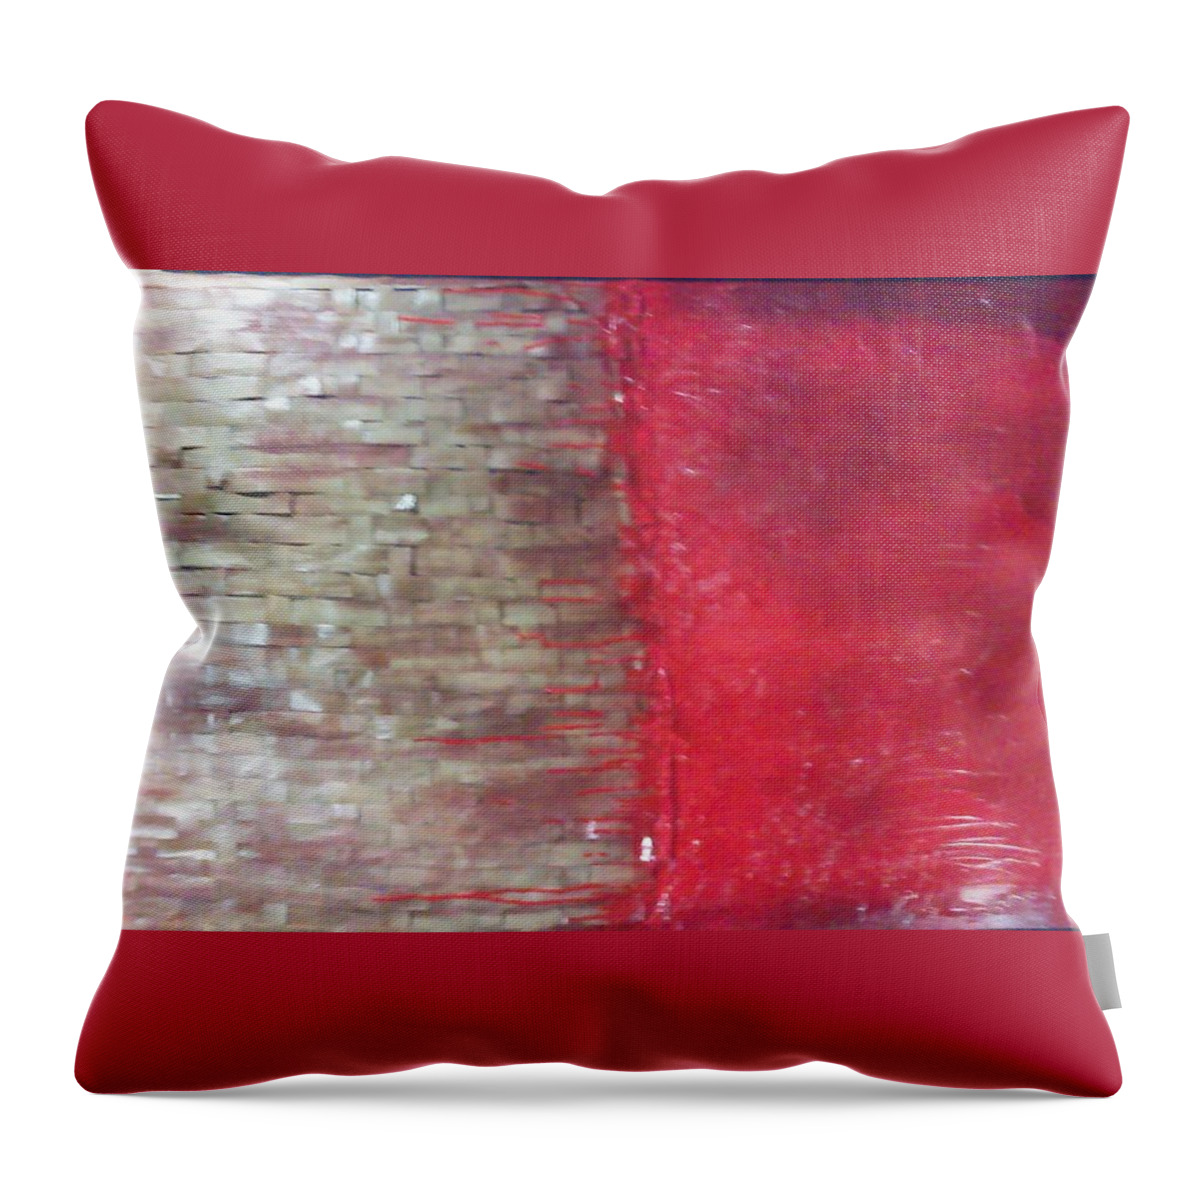 Mixed Media Throw Pillow featuring the painting Blood and bone by Femme Blaicasso